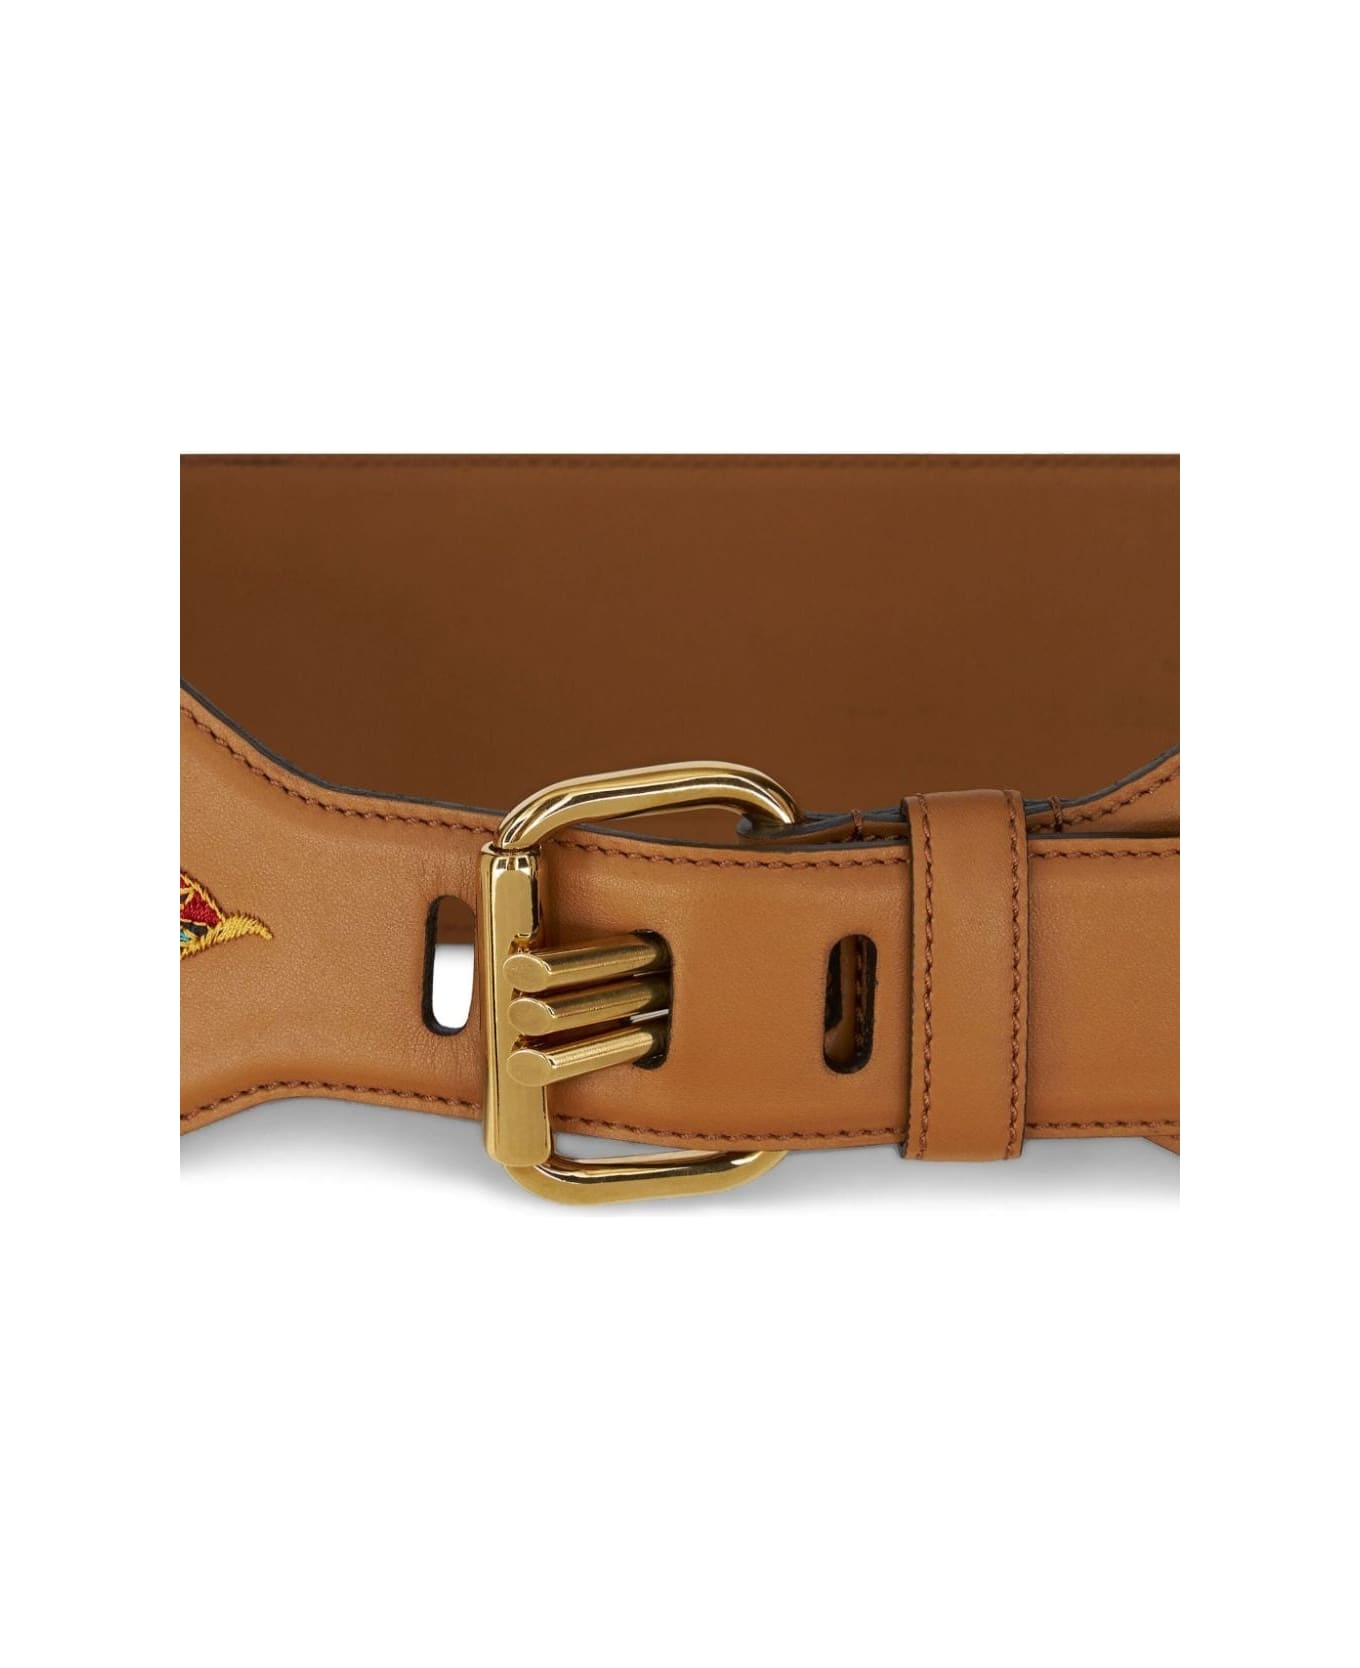 Etro Embroidered Brown Leather Belt - Bruciato ベルト